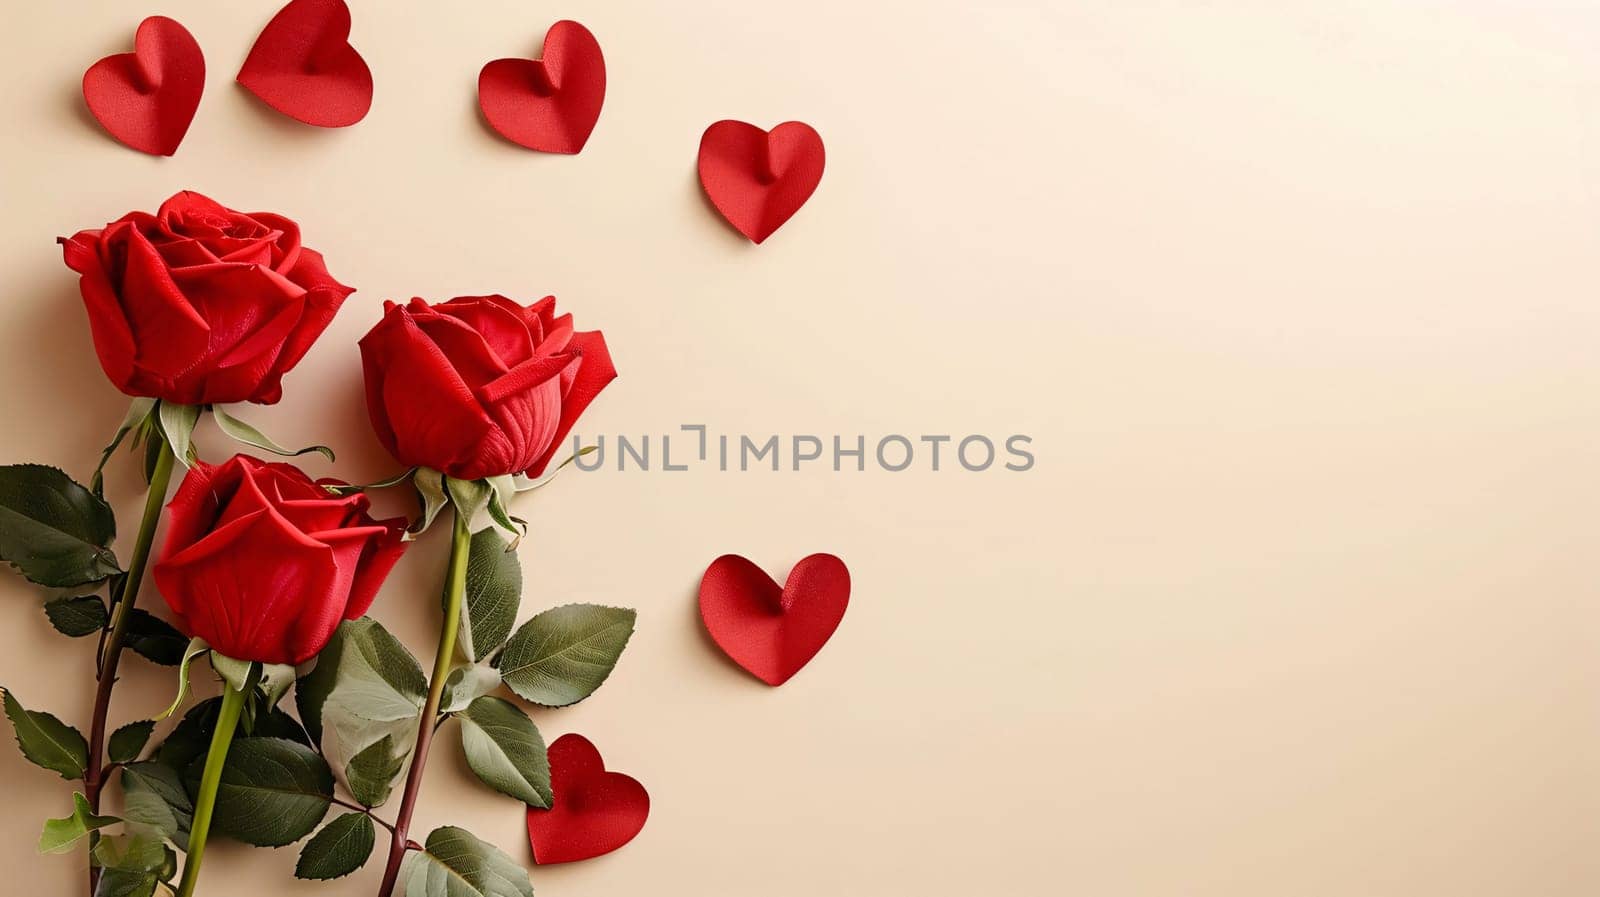 Lying on a light background are three red roses and paper red hearts.Valentine's Day banner with space for your own content. Heart as a symbol of affection and love.